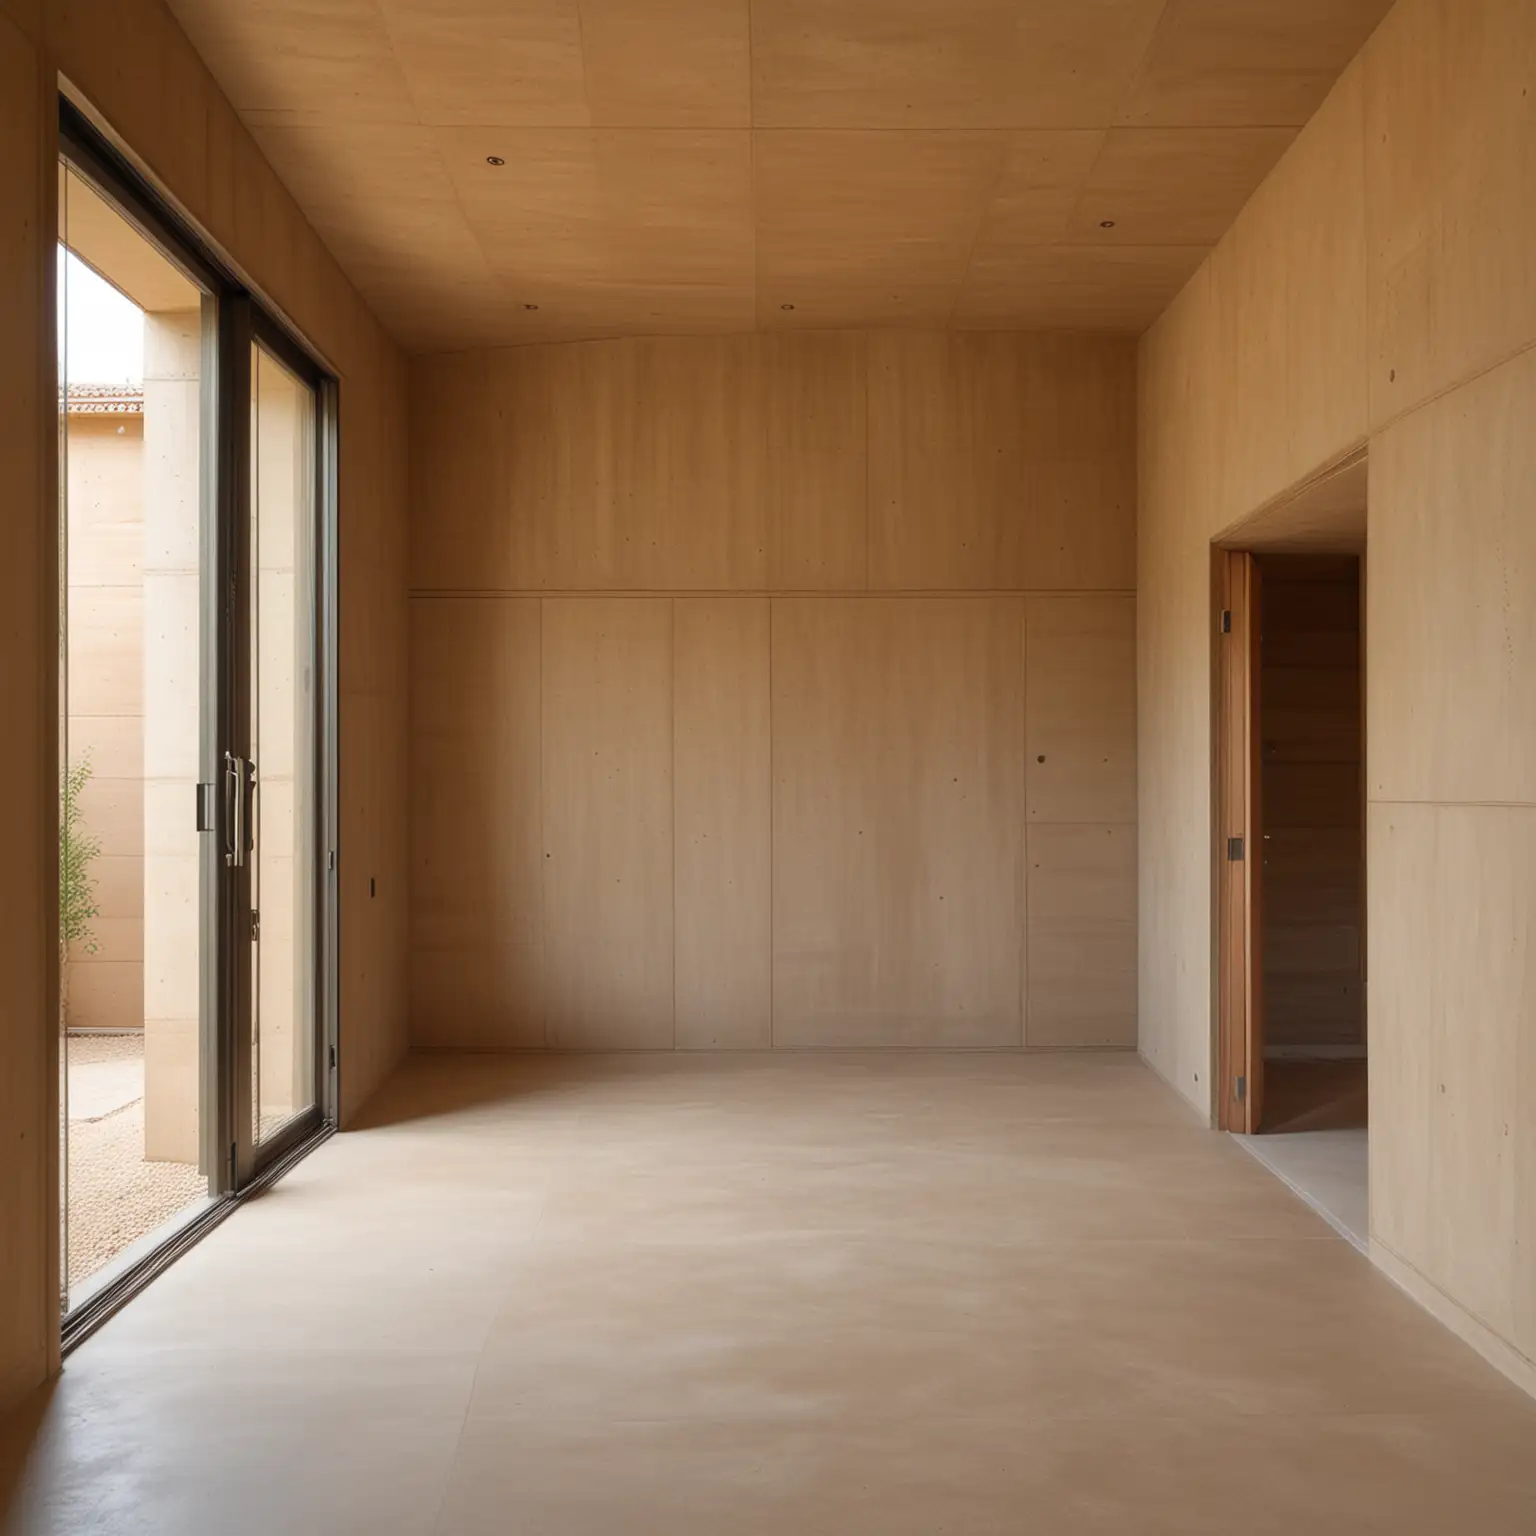 A 3 bedroom house in 3 separate blocks extending from a spine , with walls in rammed earth , with course lines every 1 foot, in the style of Tadao Ando
